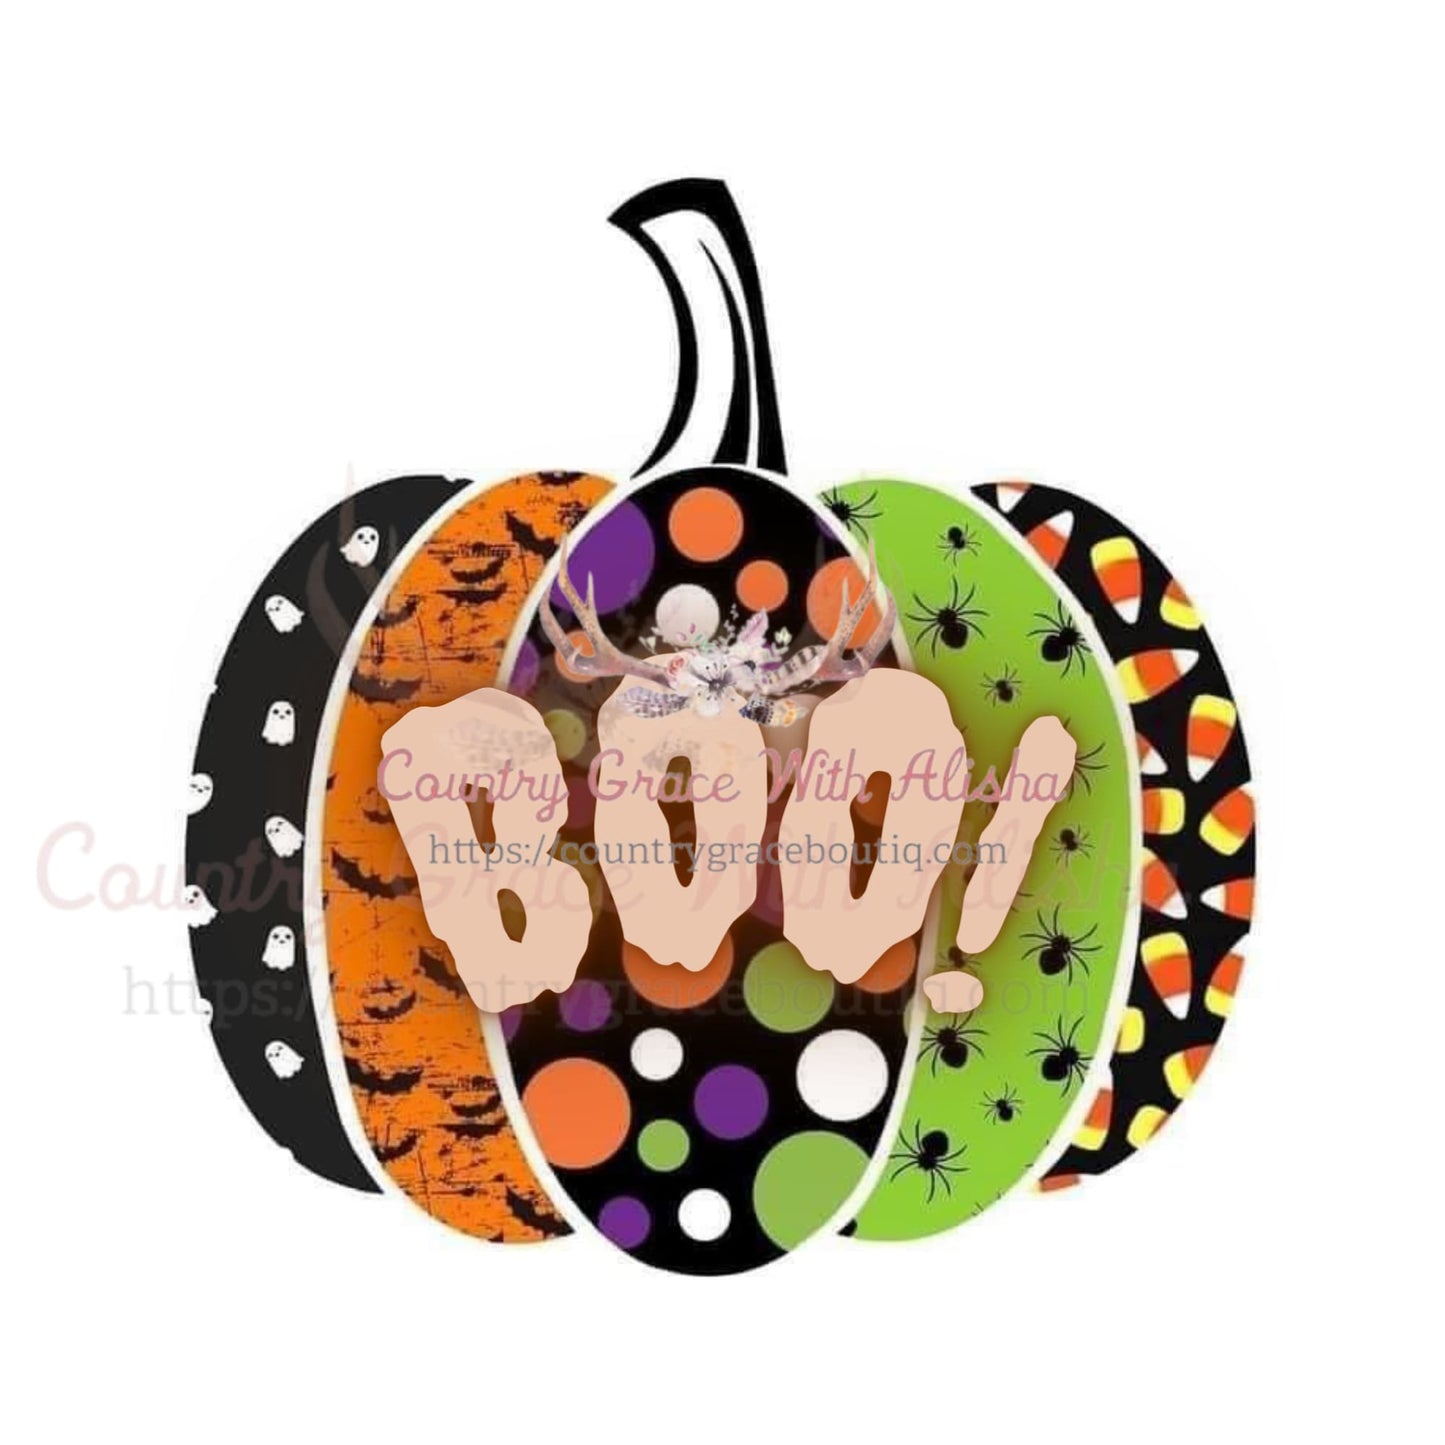 Boo Pumpkin Sublimation Transfer - Sub $1.50 Country Grace 